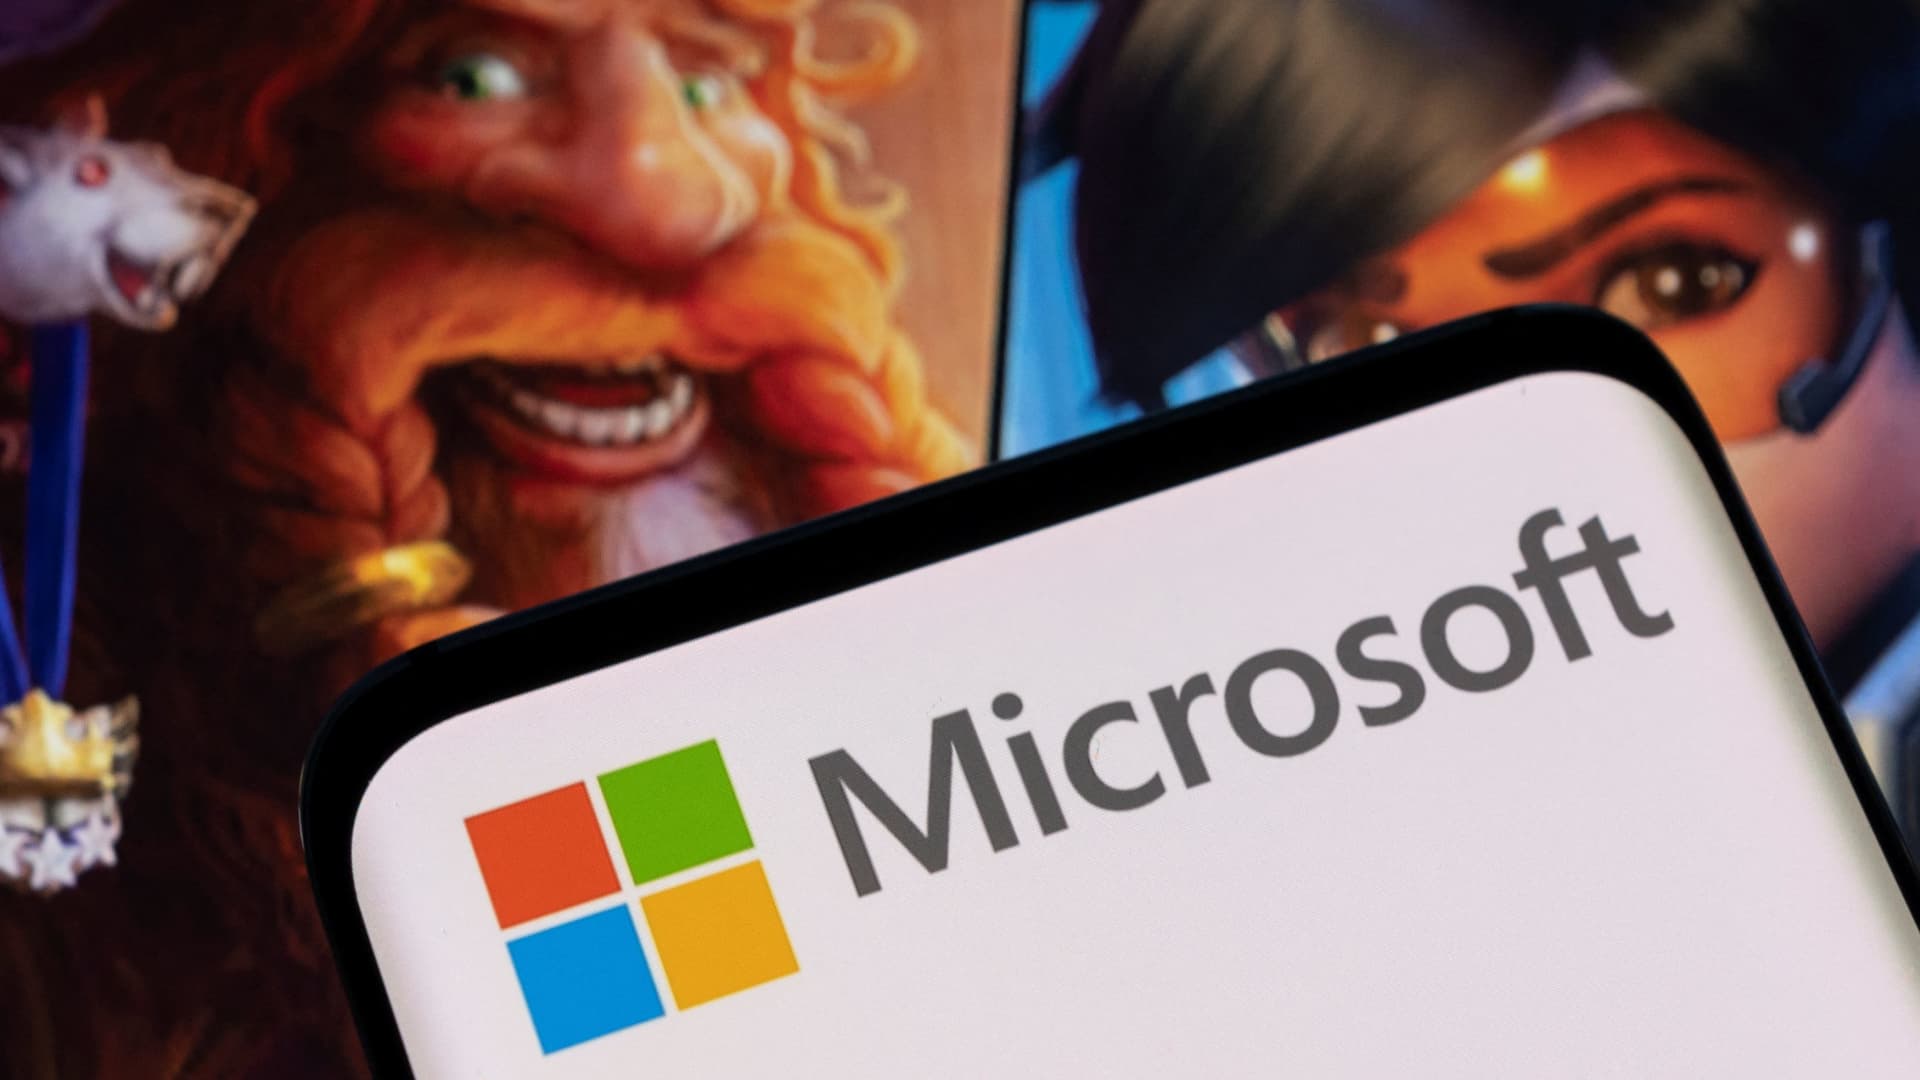 Microsoft’s $ 69 billion acquisition of Activision is facing competition investigation in the UK